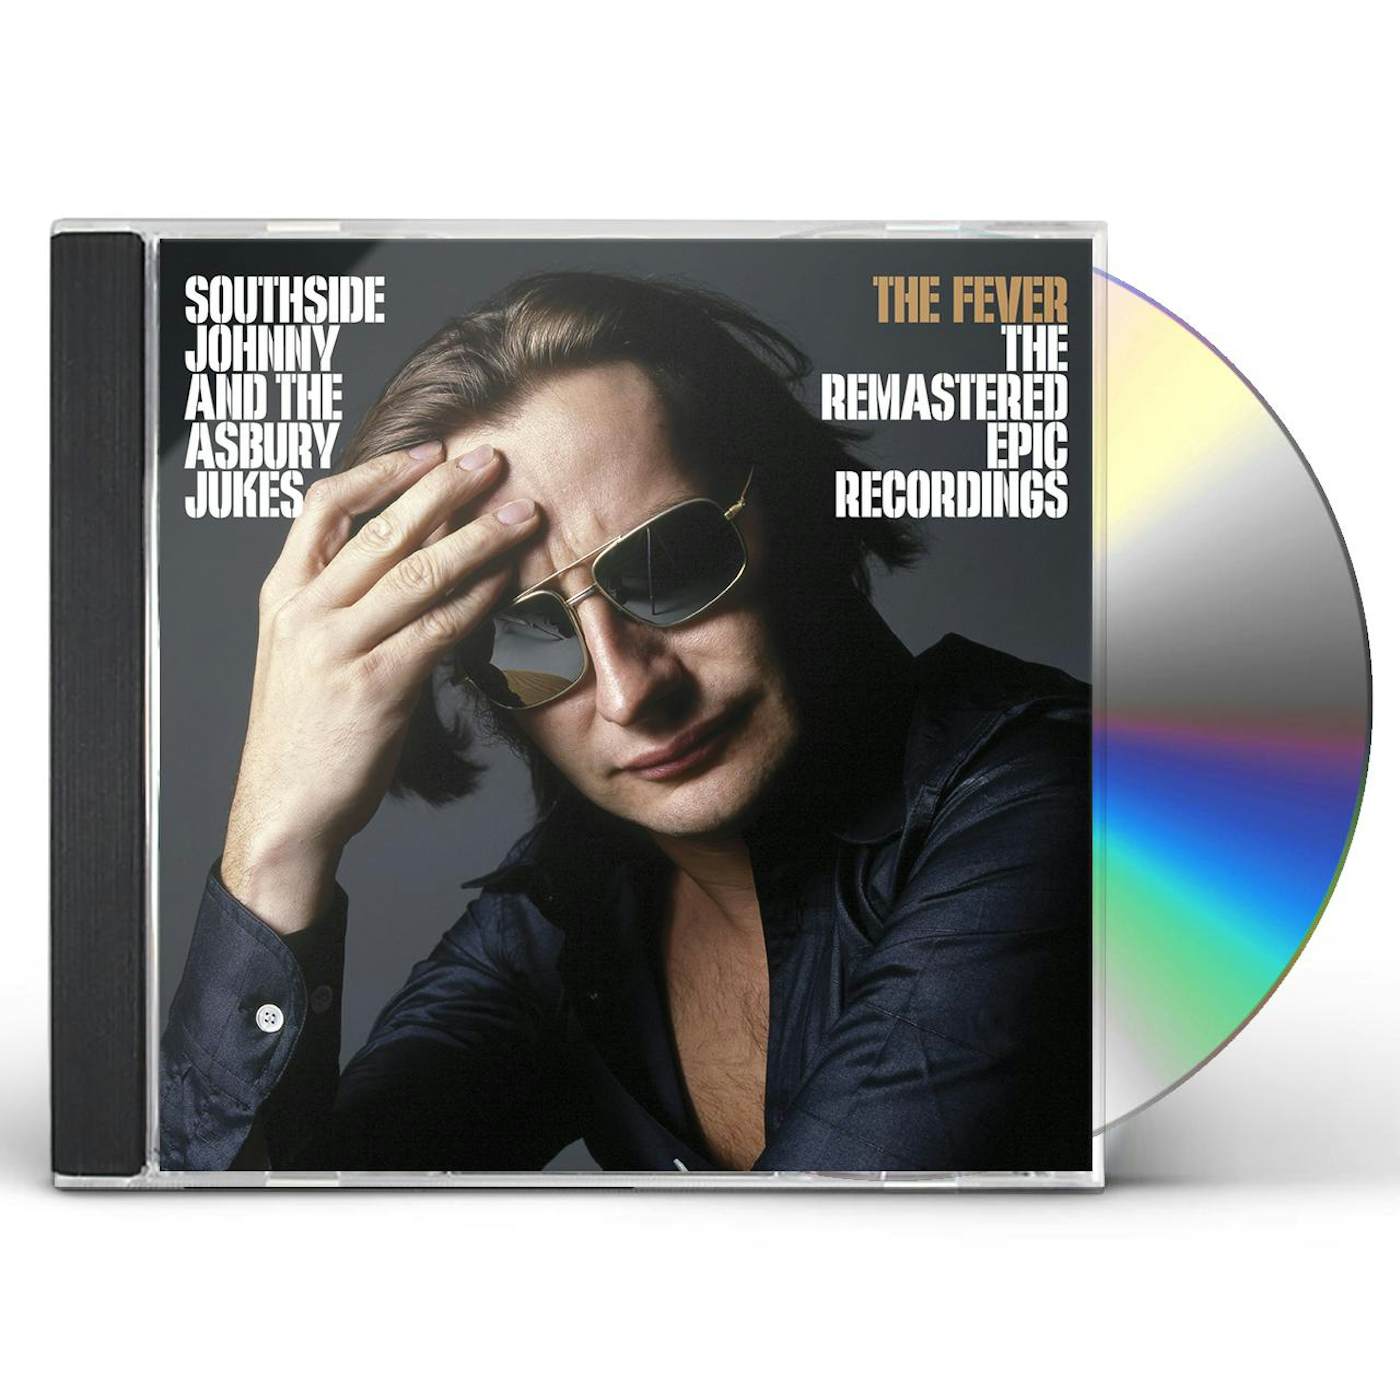 Southside Johnny And The Asbury Jukes Fever: The Remastered Epic Recordings CD